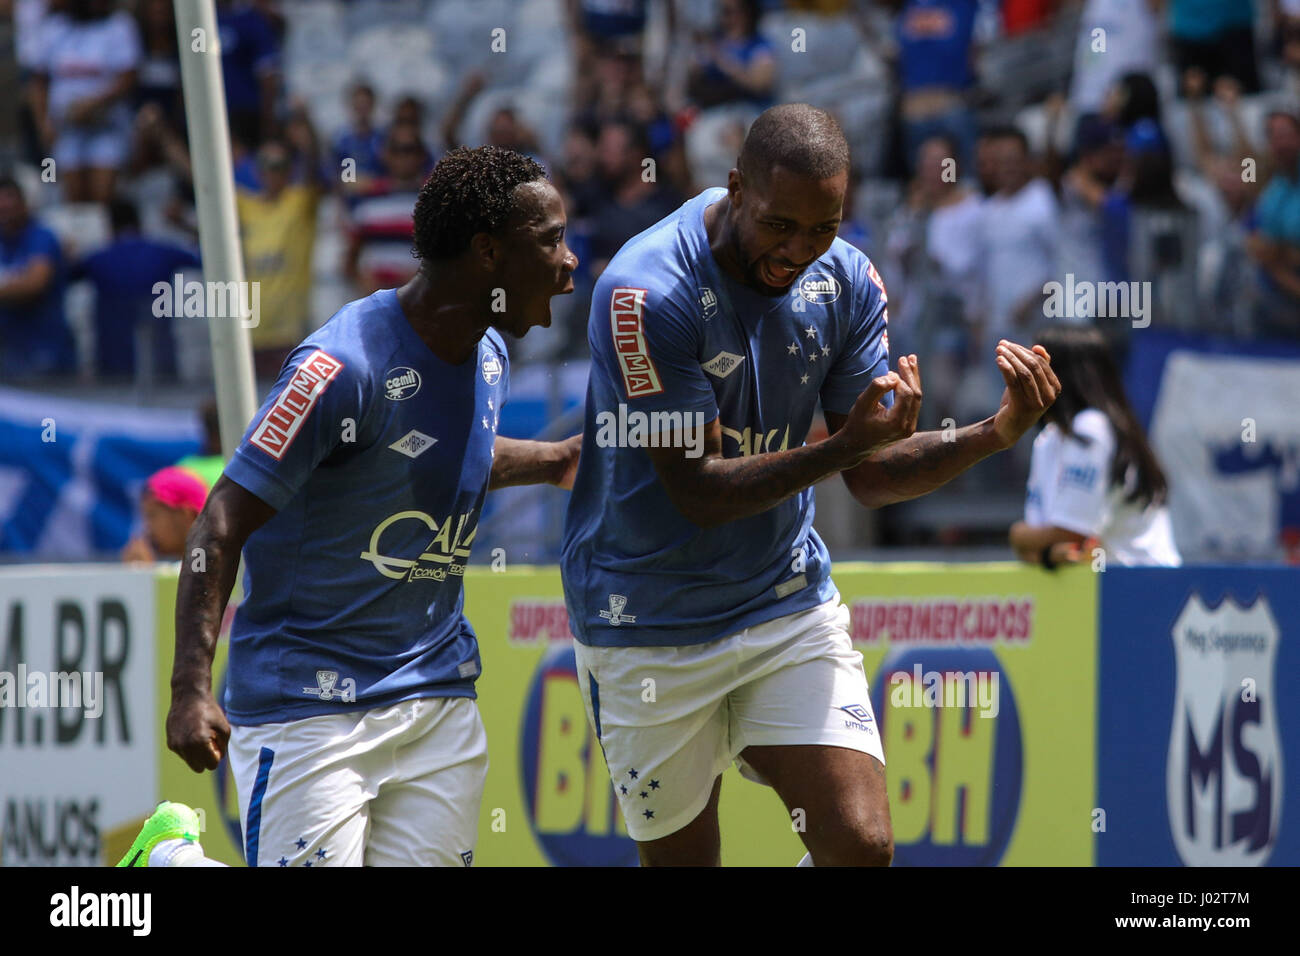 Dedé do Cruzeiro during match against the Democrat in a match valid for the eleventh round of the Mineiro Championship, at the Governador Magalhães Pinto Stadium, the Mineirão, in Belo Horizonte, on Sunday, 09. (PHOTO: DOUG PATRICIO/BRAZIL PHOTO PRESS) Stock Photo